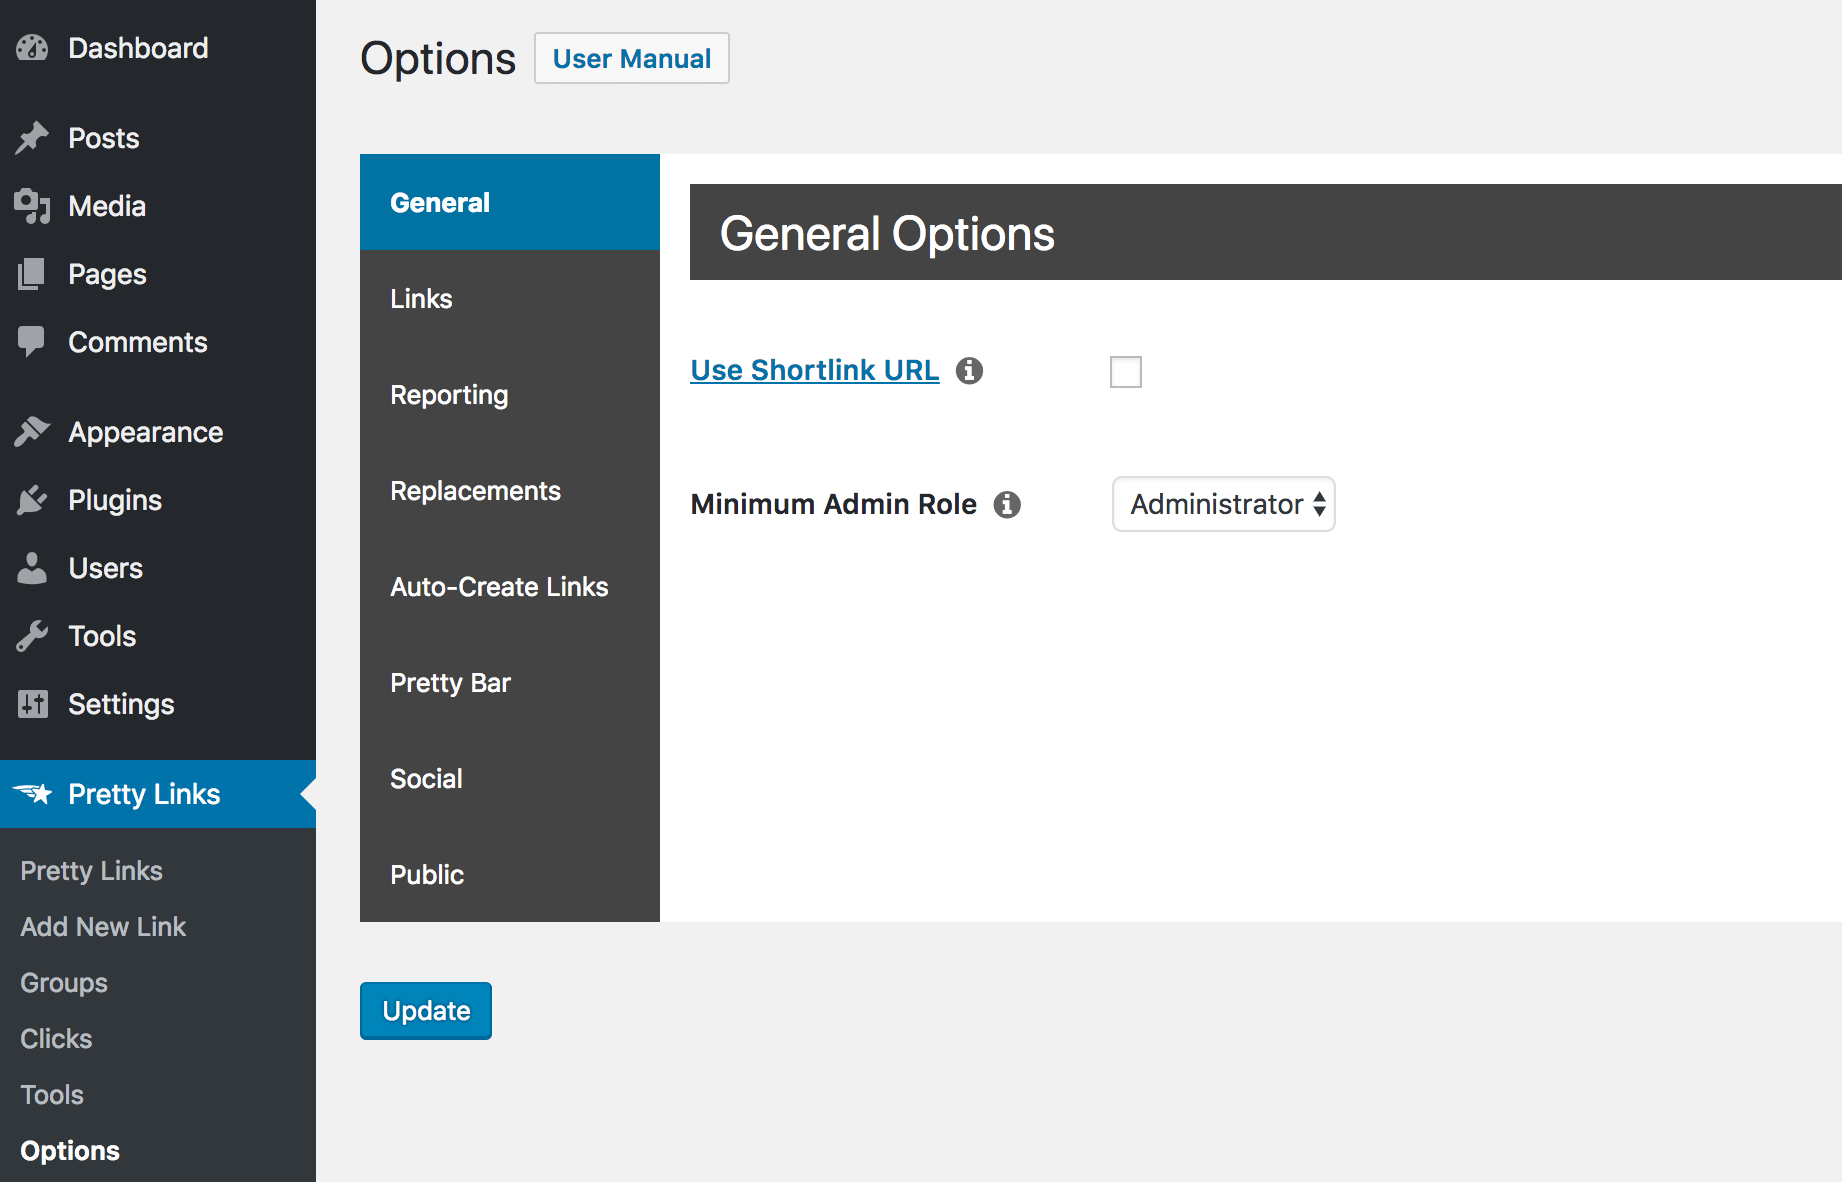 The Pretty Links options.